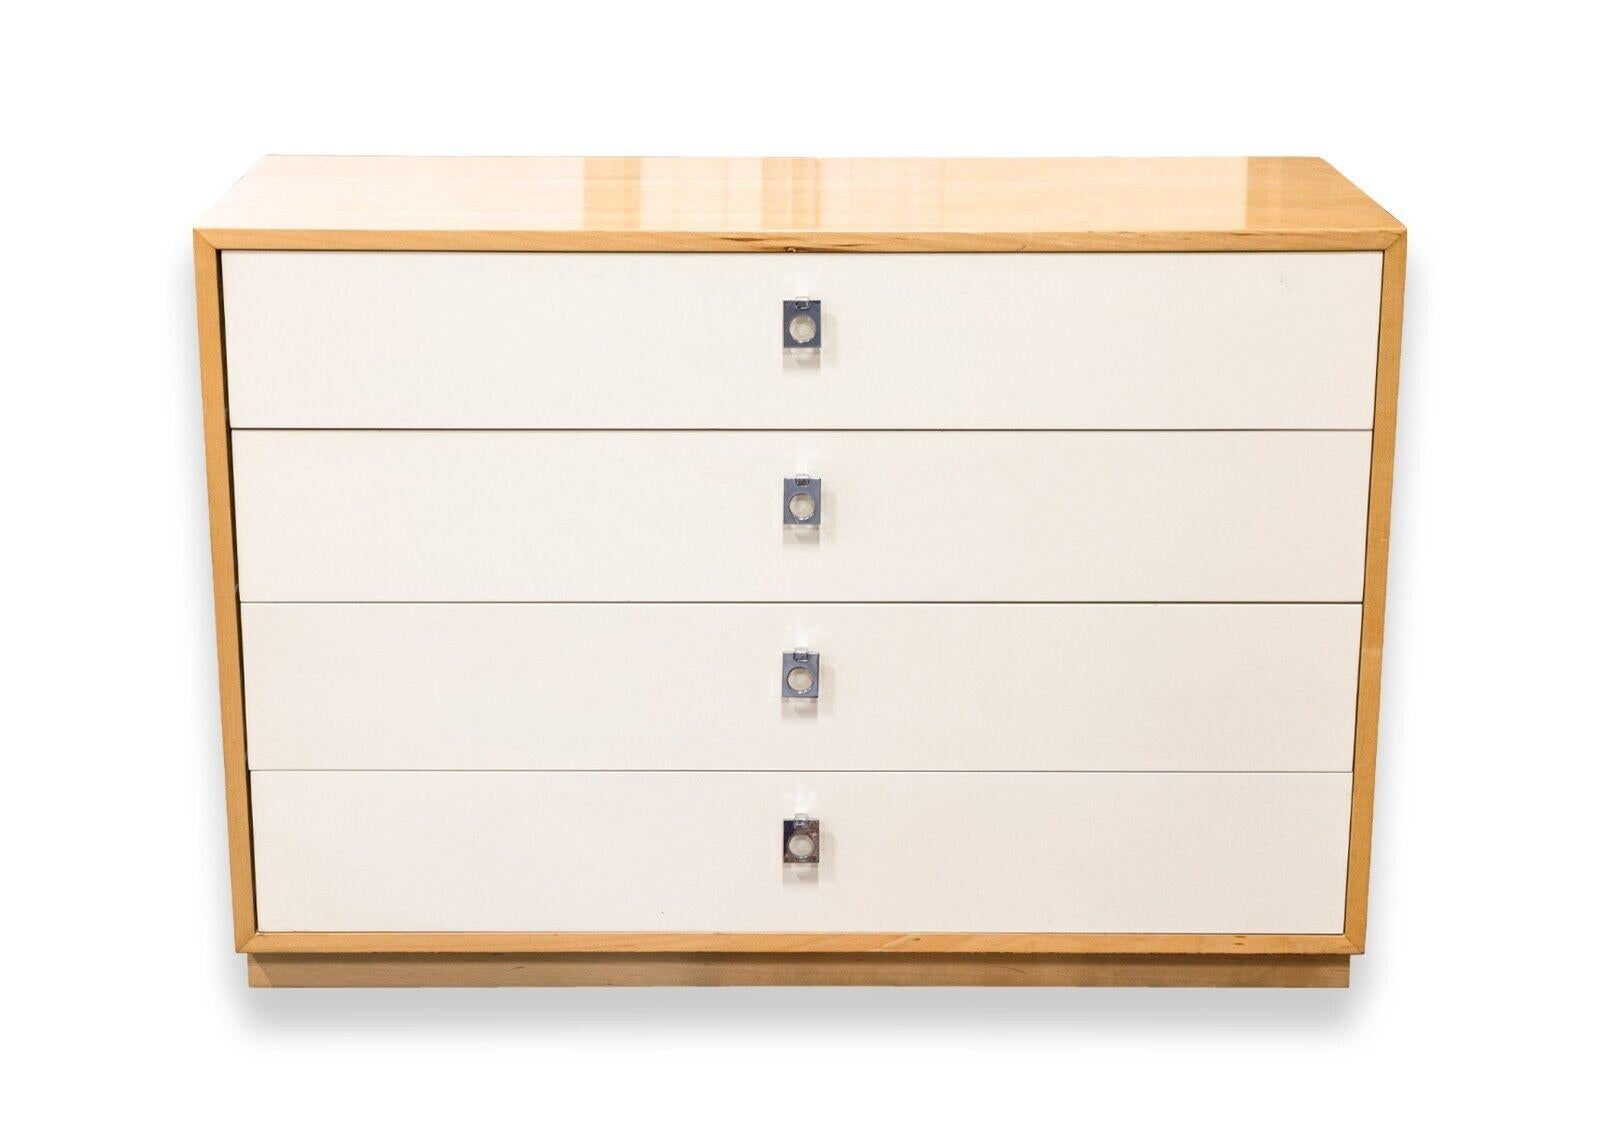 A pair of Jack Cartwright birch wood dressers for Founders Furniture. A cute set of dressers featuring a full birch wood construction, a semi gloss finish, and four equally sized pull out white dresser drawers. The Founders Furniture tag can be